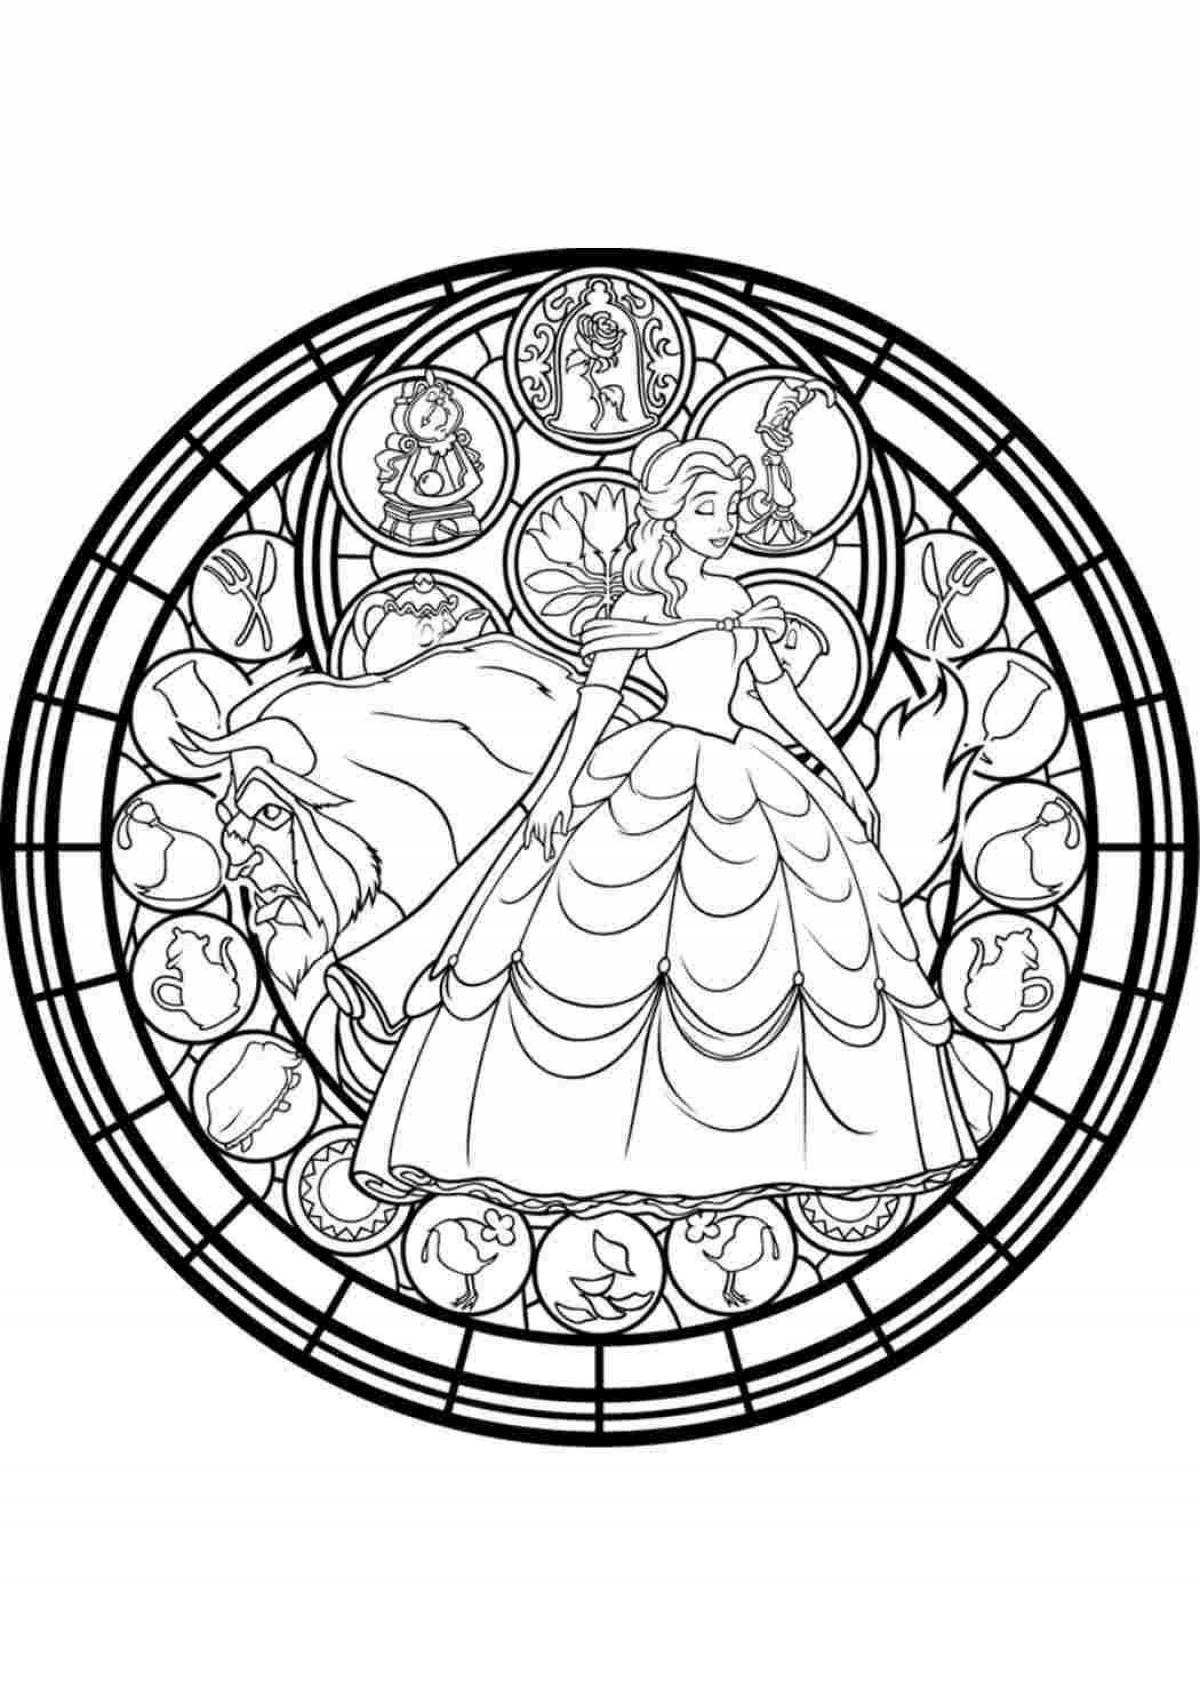 Amazing stained glass coloring page